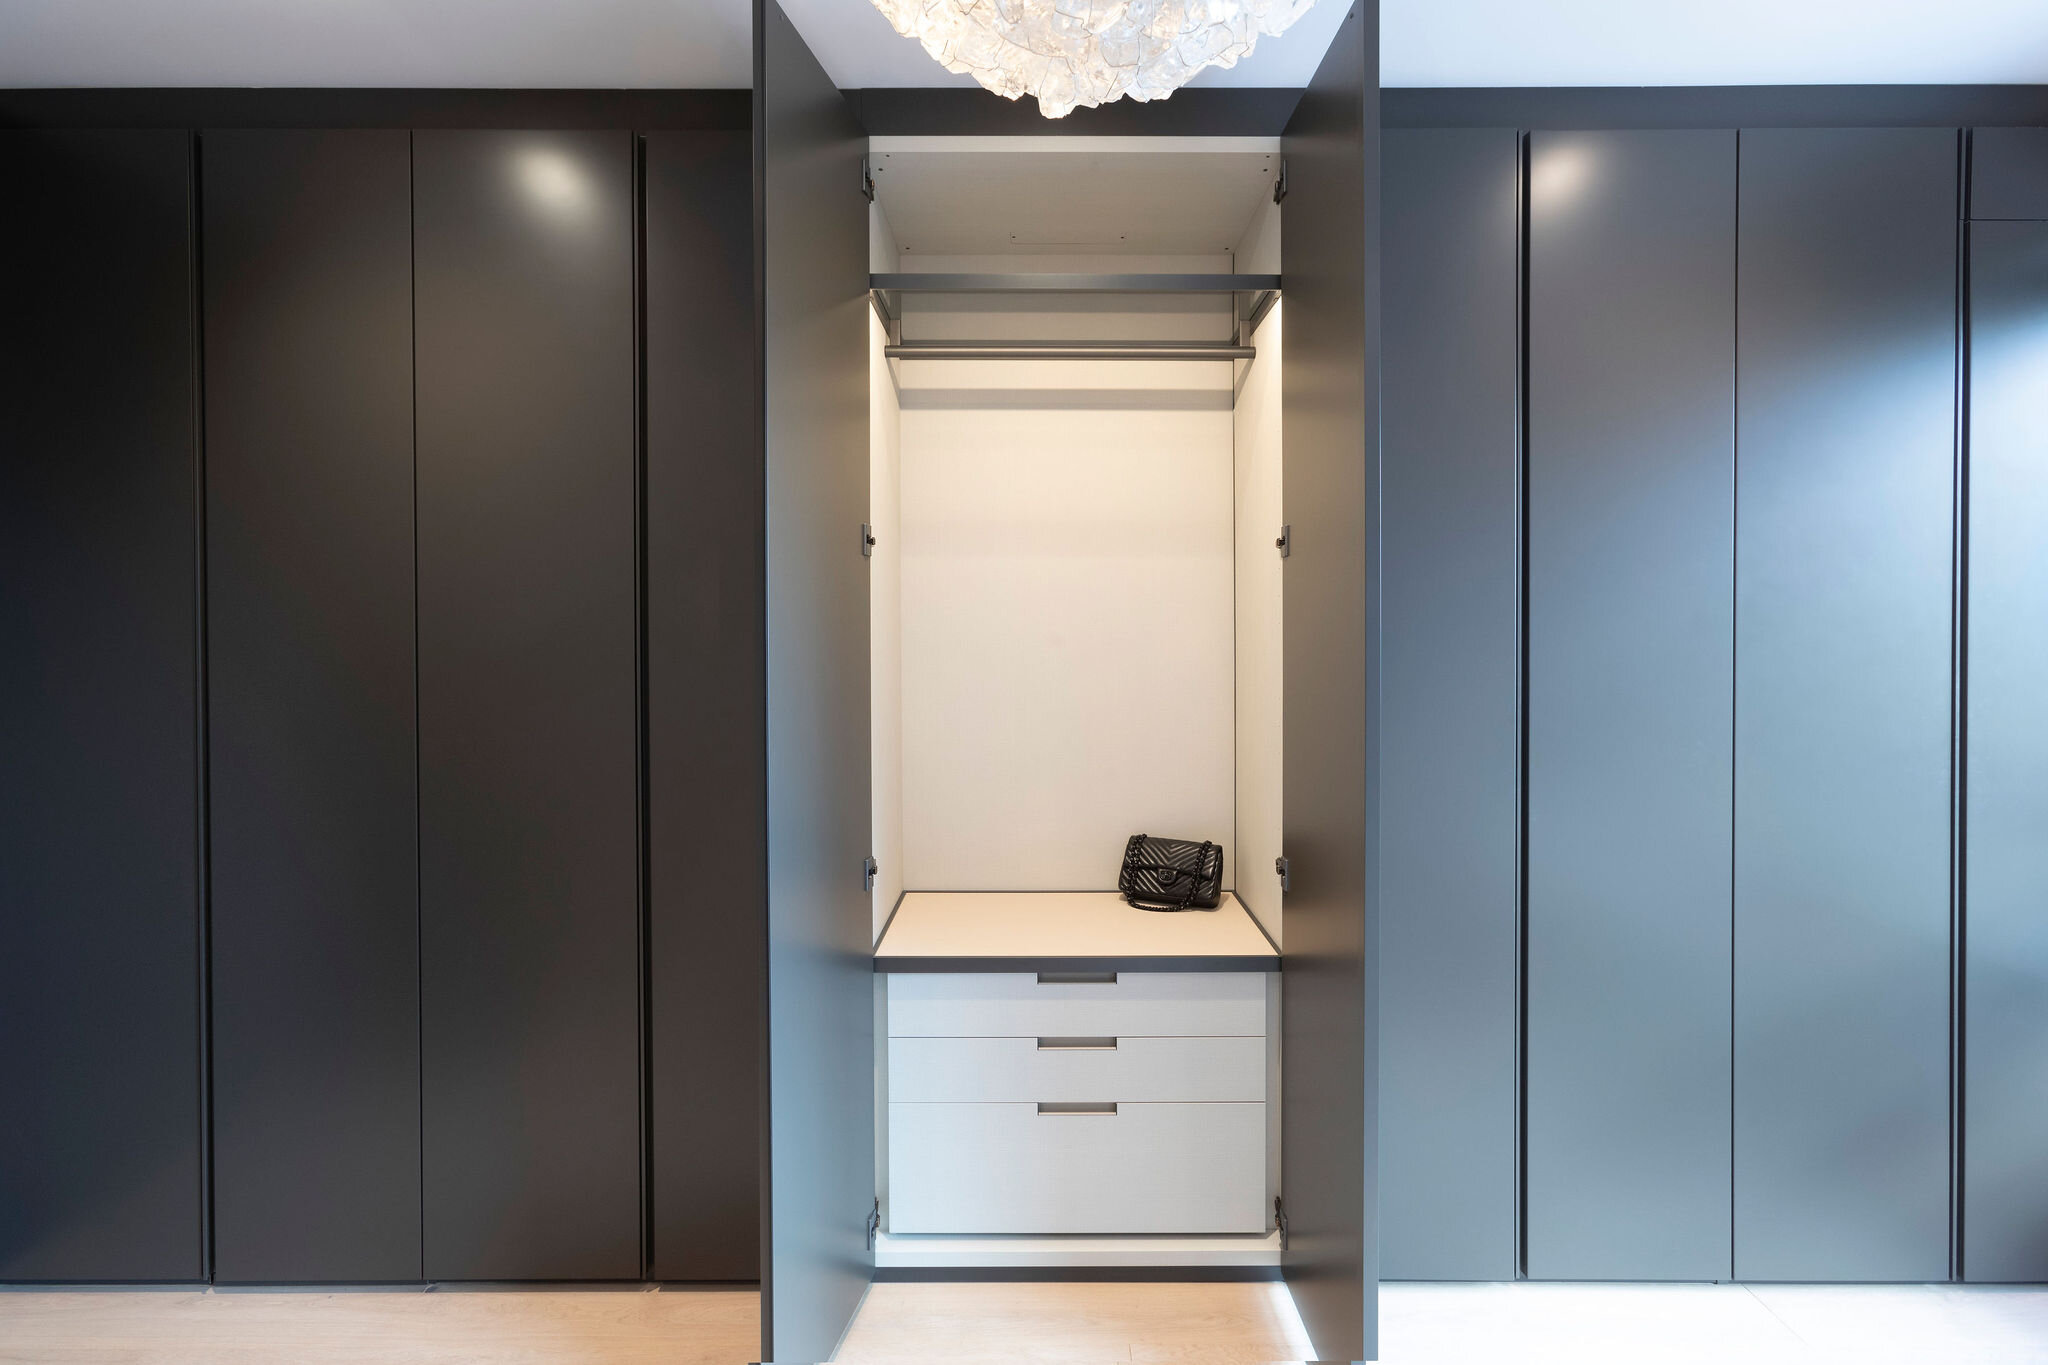  Each closet opens up to lit leather interiors. 